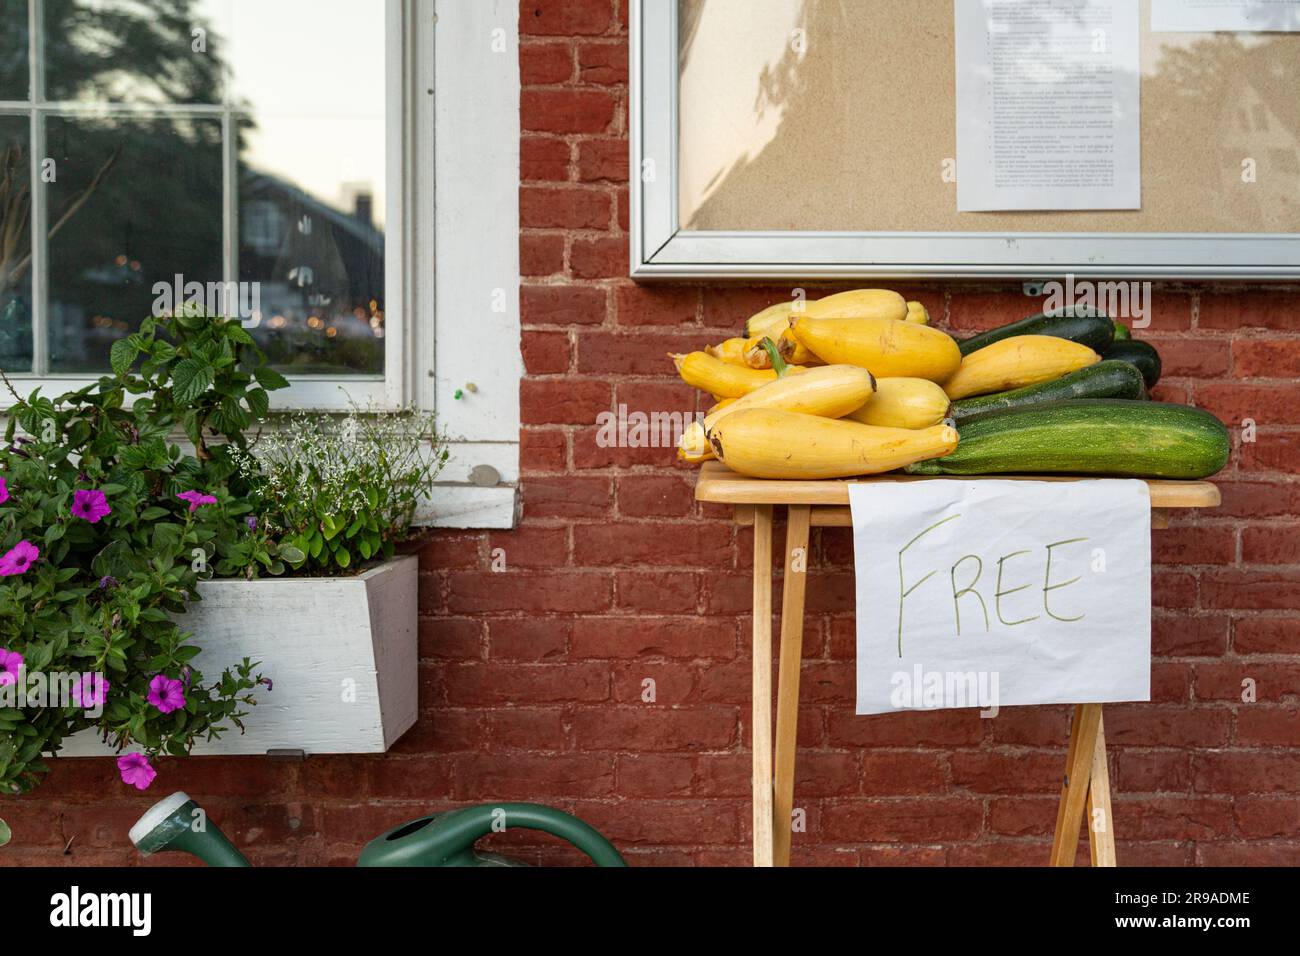 Free produce at post office, Grafton, Vermont Stock Photo